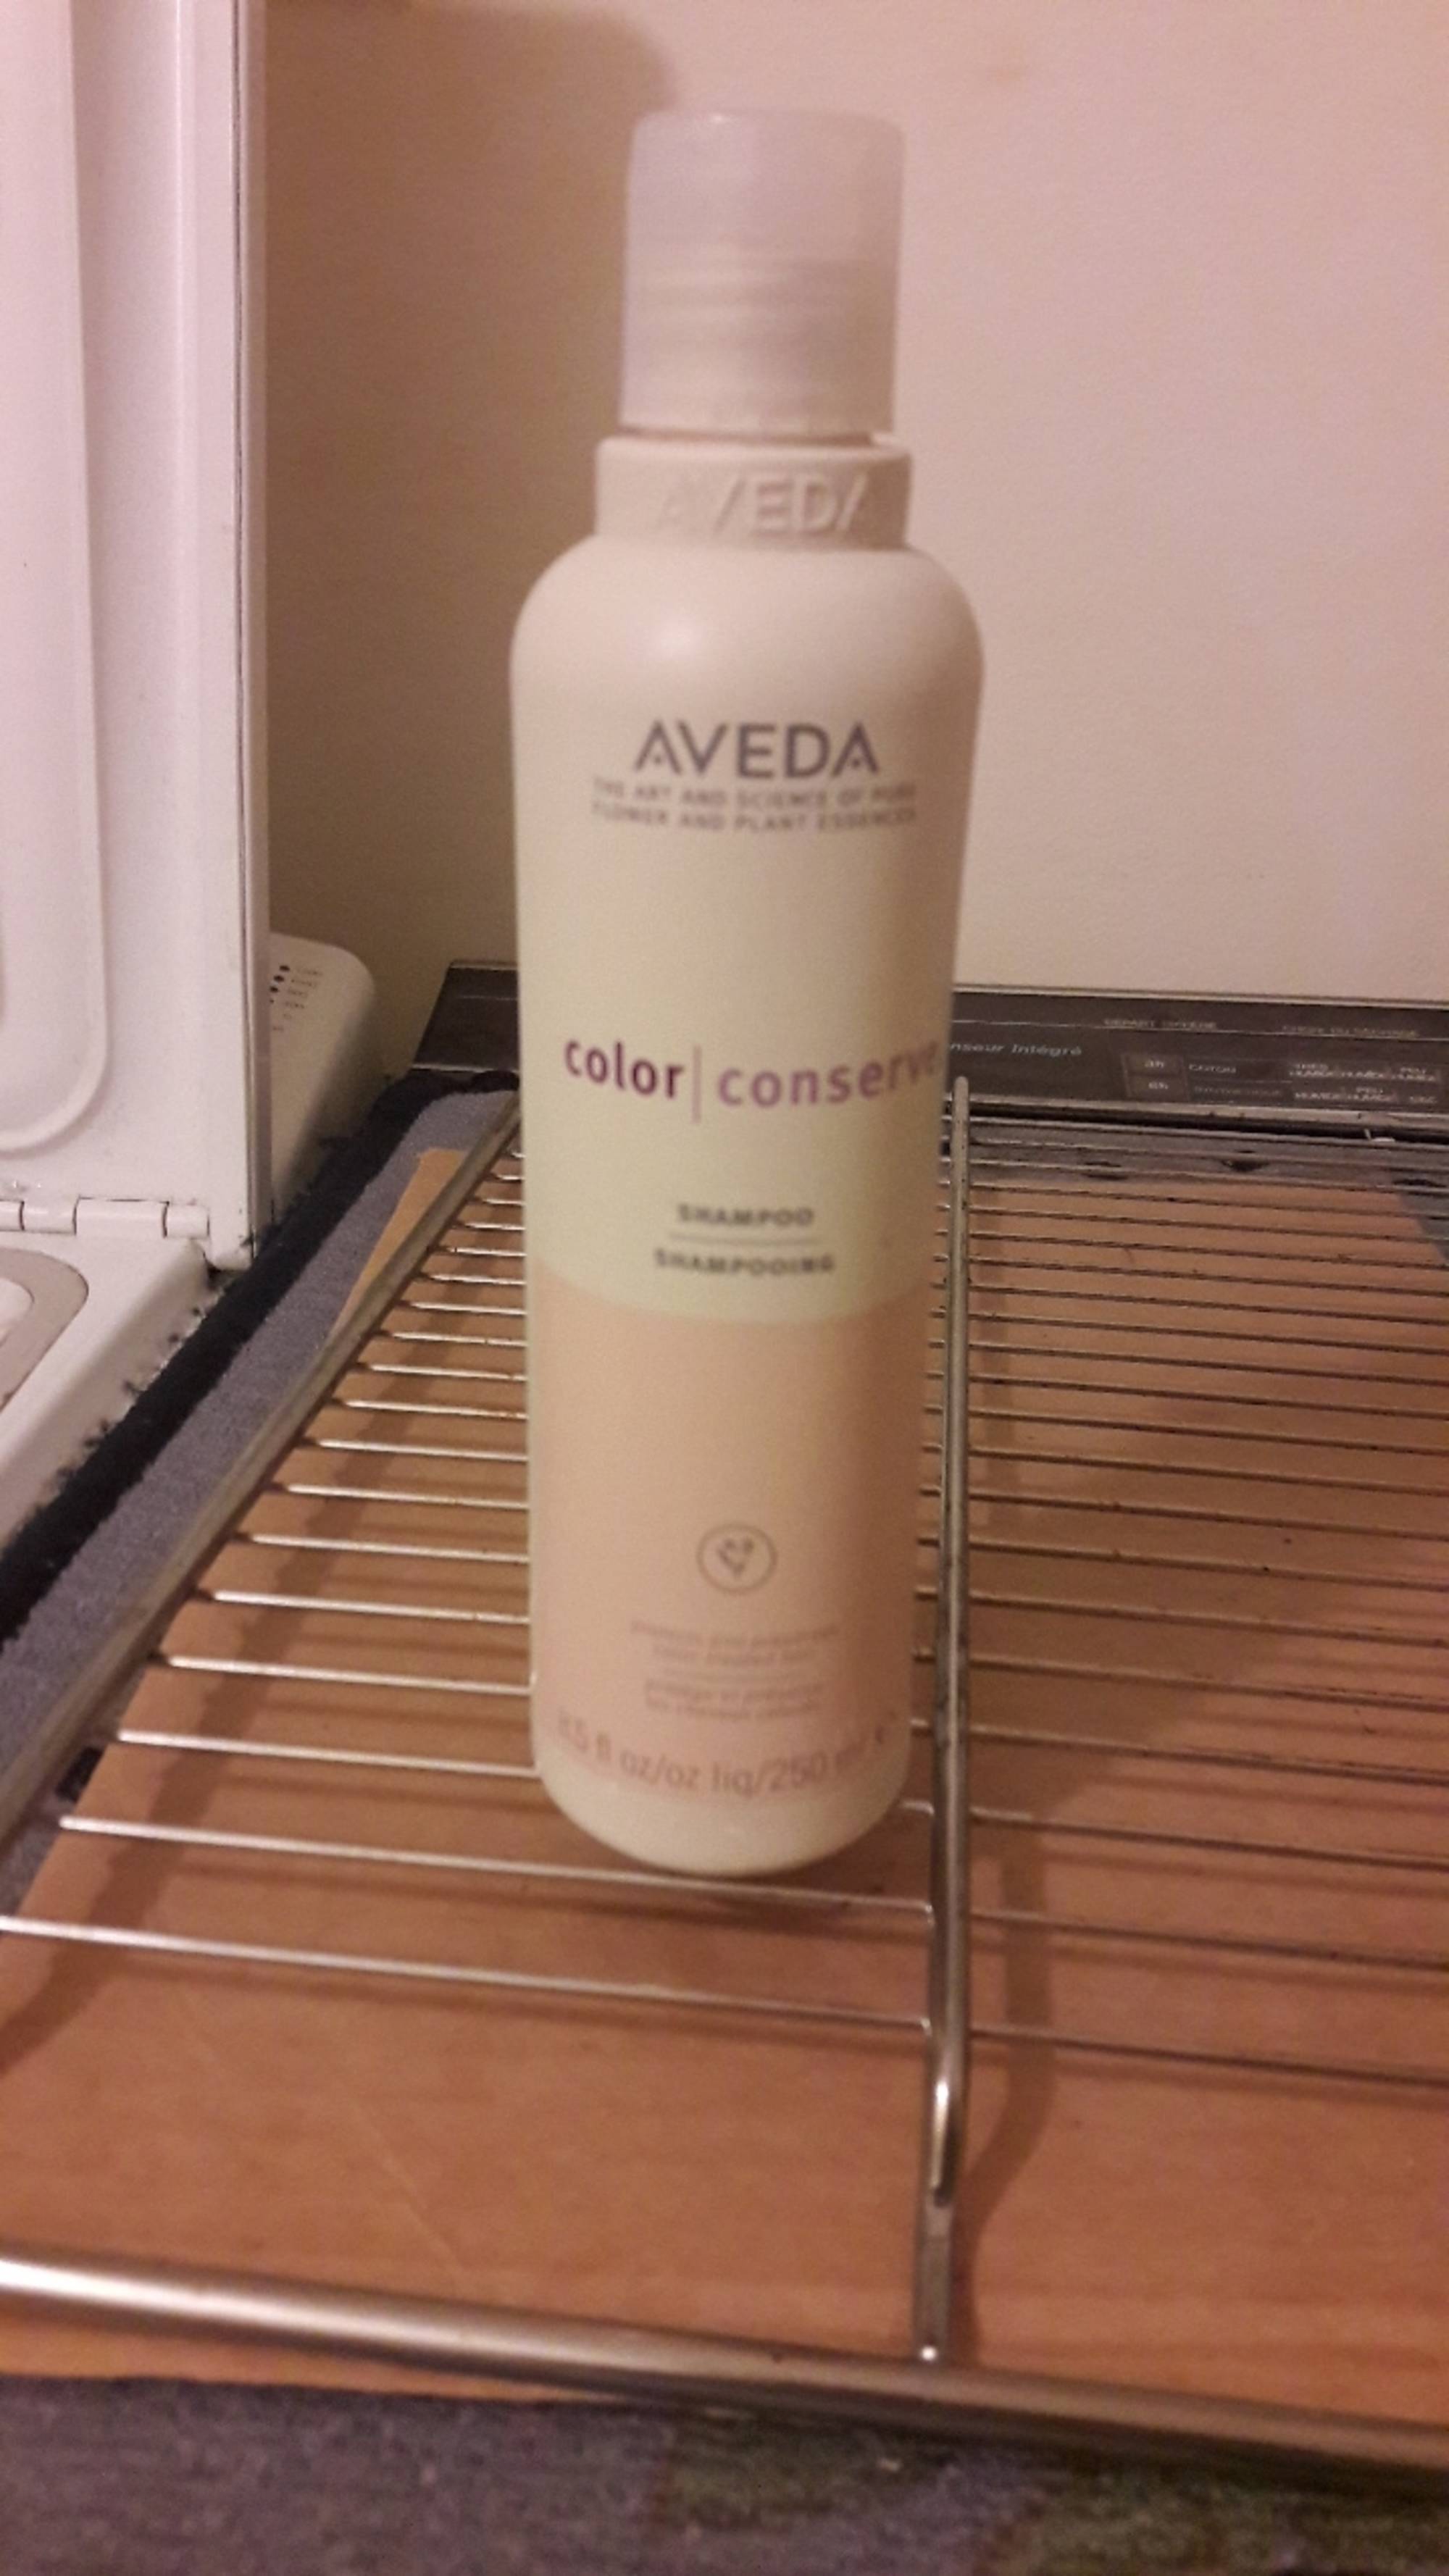 AVEDA - Color conserve - Shampooing